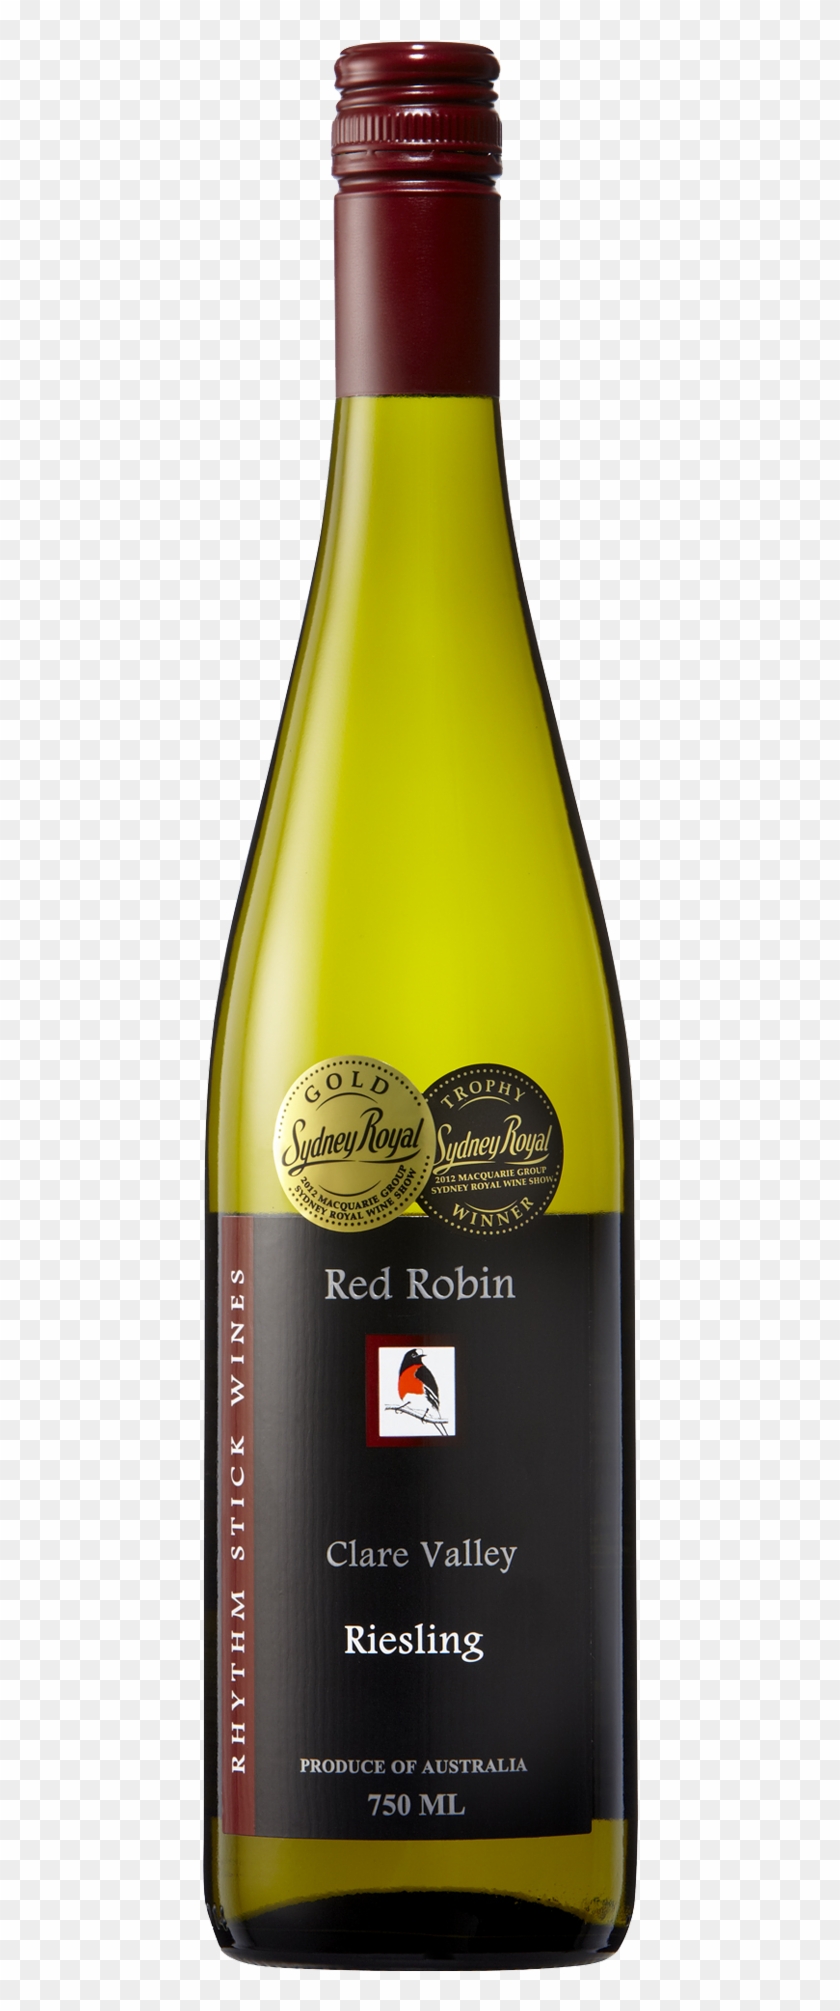 Rhythm Stick Wines Red Robin Riesling - Champagne Clipart #5763943